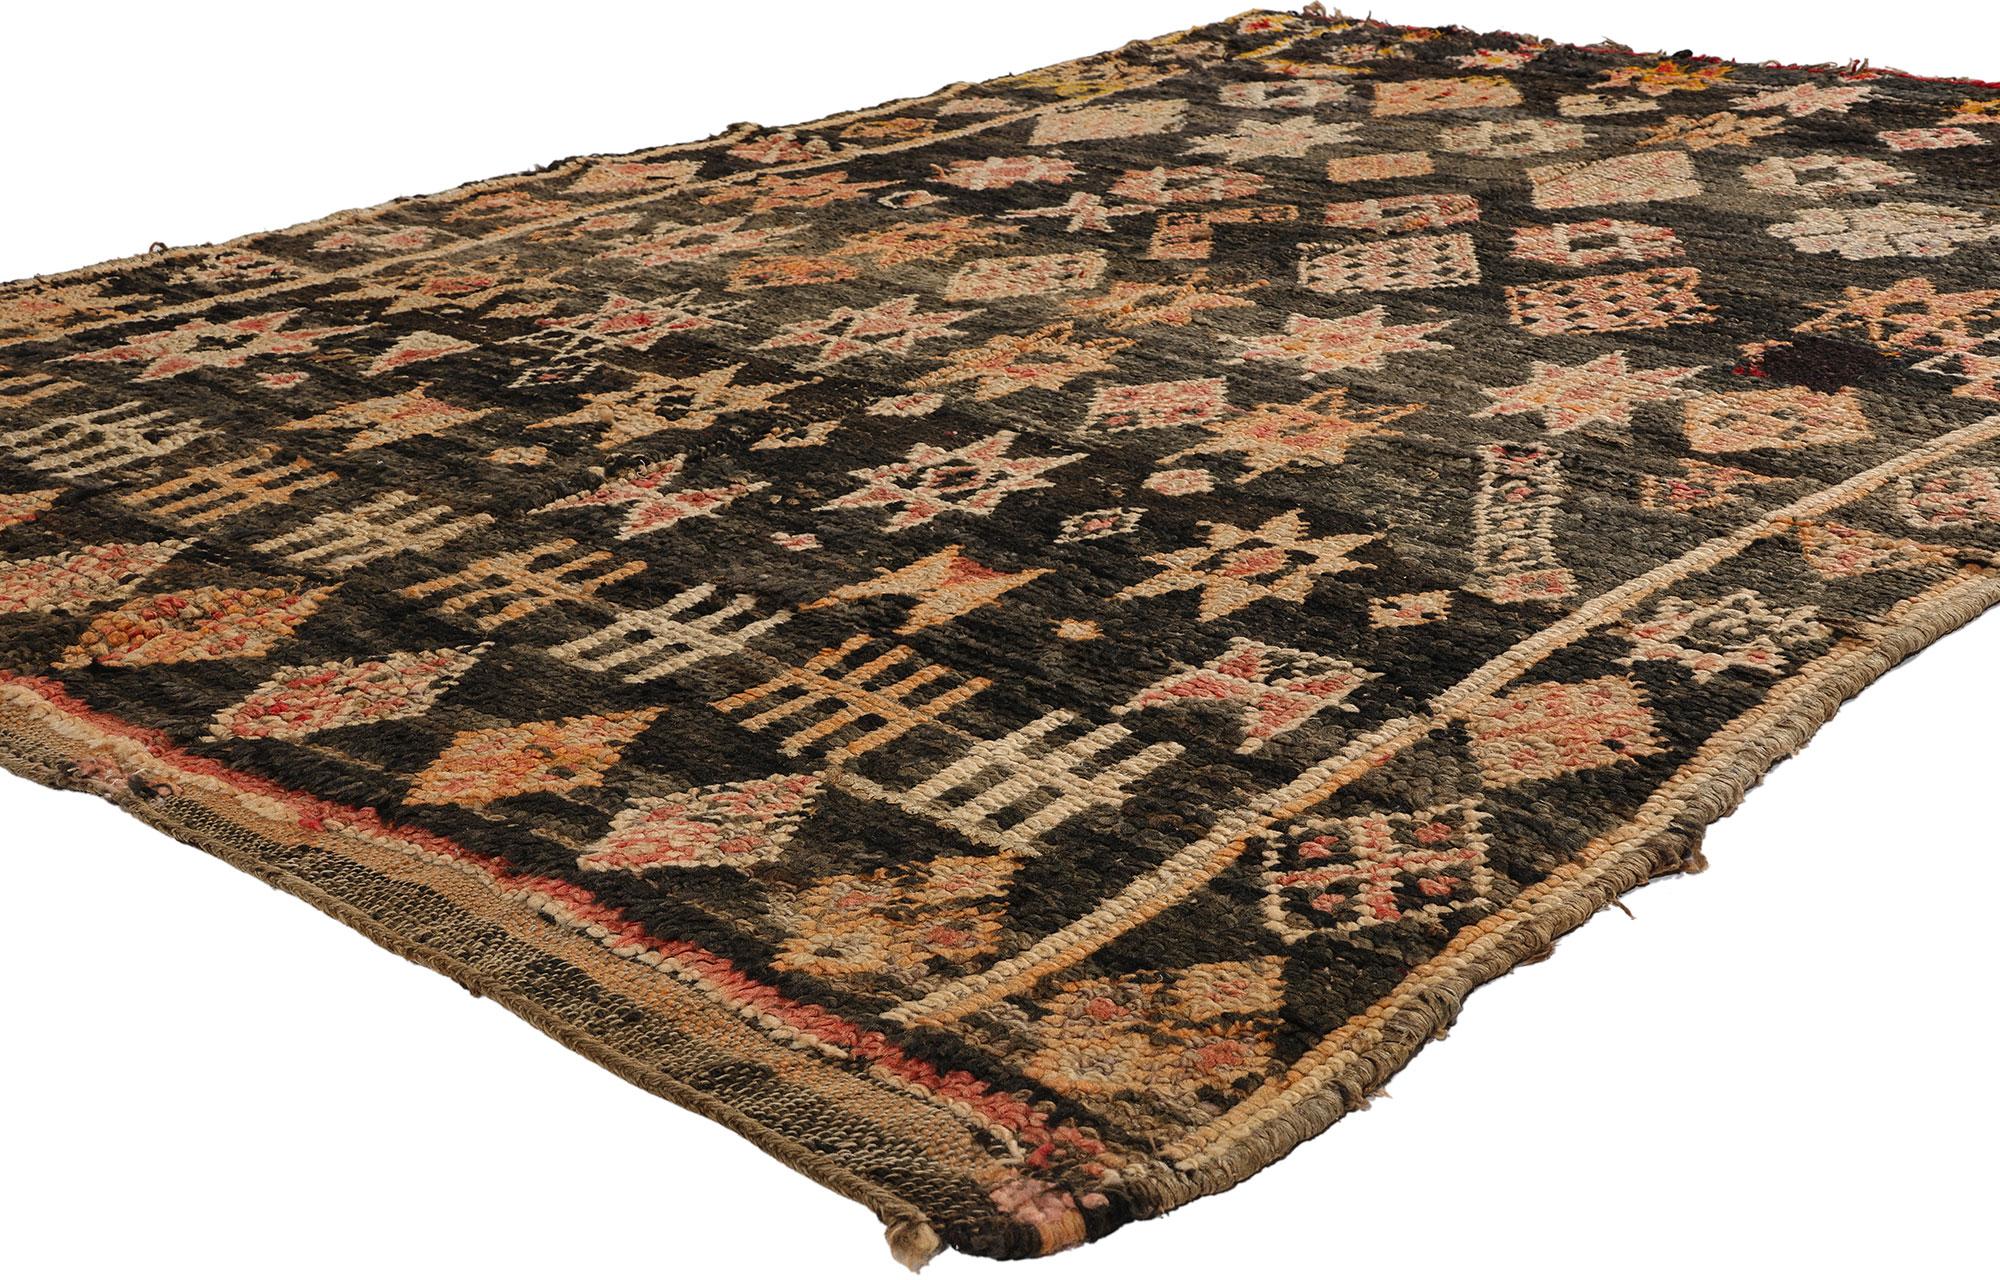 21767 Vintage Black Beni Mrirt Moroccan Rug, 05'02 x 07'05. Beni Mrirt rugs epitomize the esteemed tradition of Moroccan weaving, celebrated for their sumptuous texture, intricate geometric patterns, and calming earthy tones. Crafted by skilled